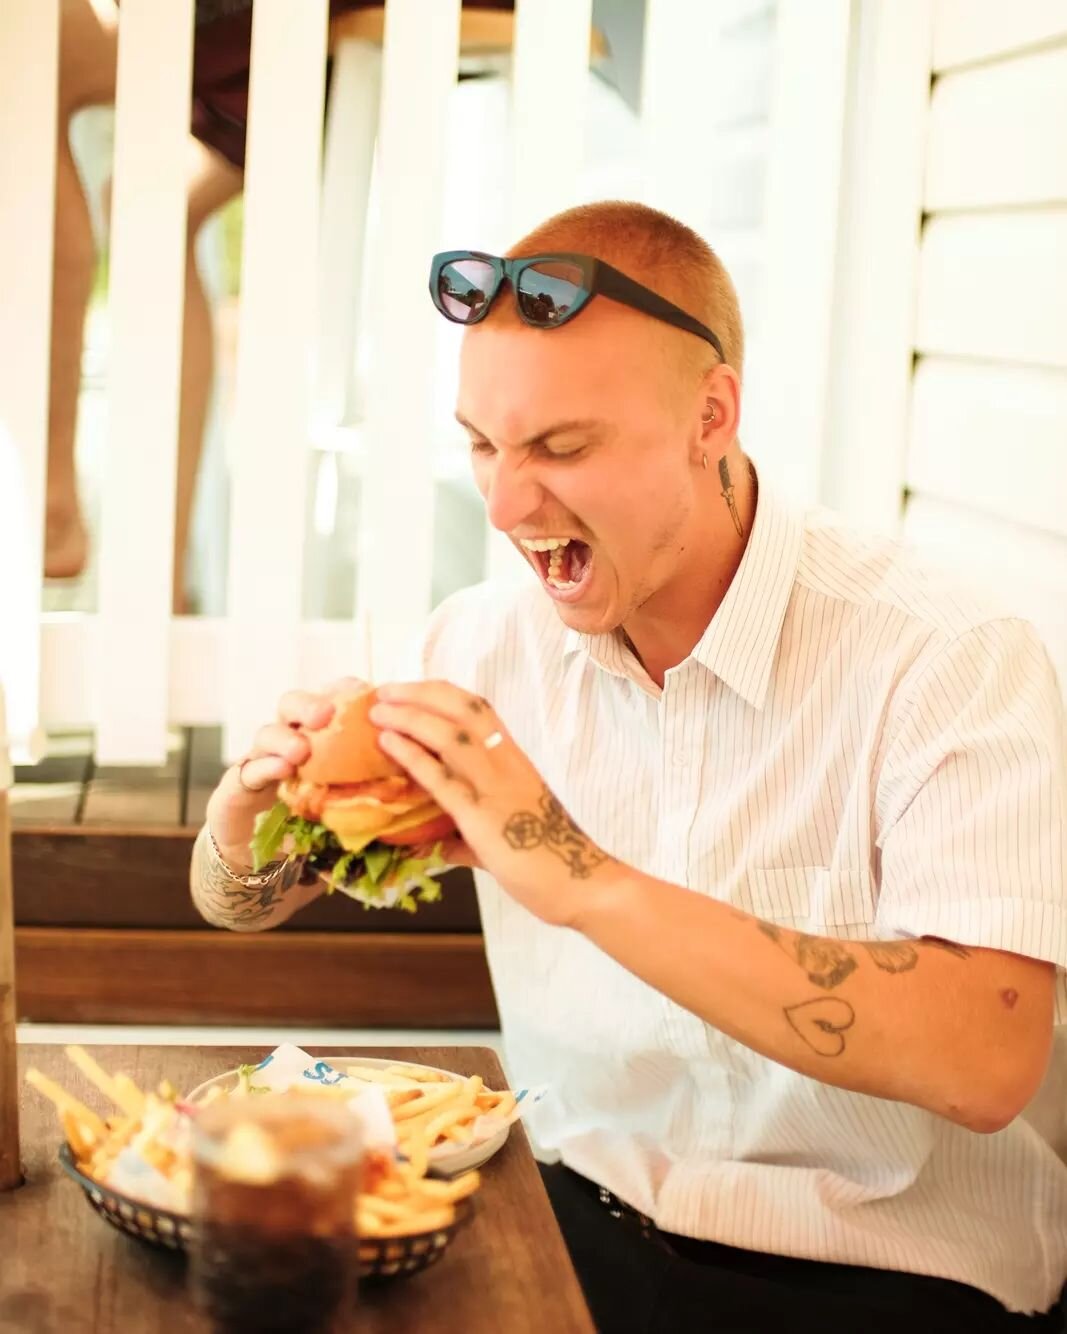 Tag your mate with the best burger face 🍔&nbsp;@callumfullick wins our vote every time 🫶

Ring in the weekend with the best burger in the bay. Order ahead at the link in bio.